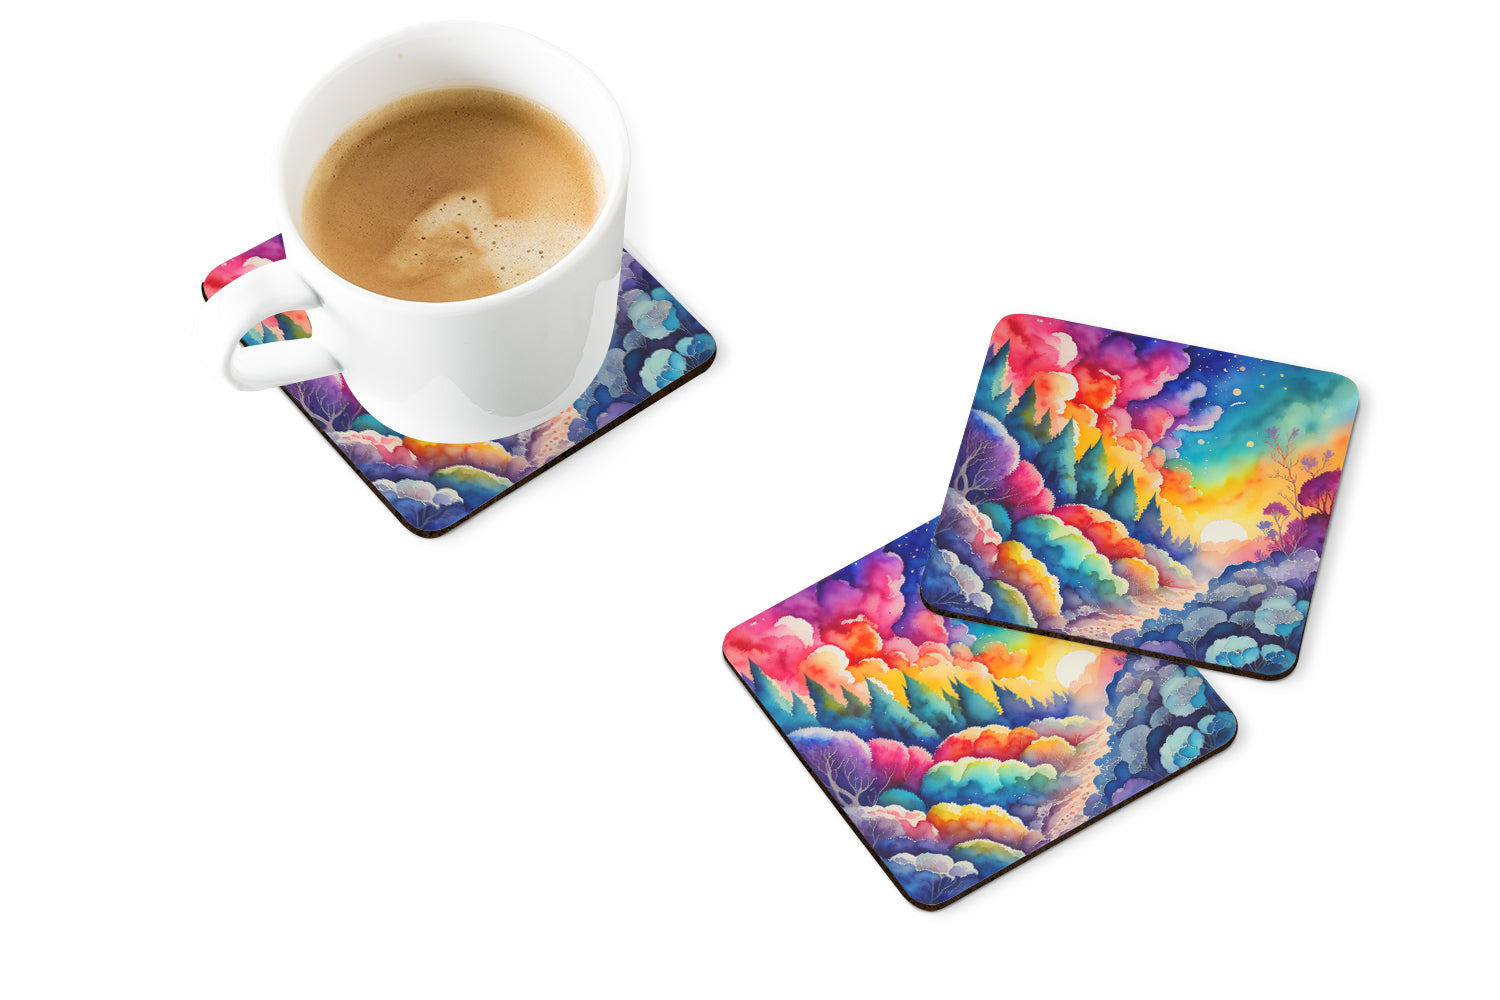 Buy this Colorful Dusty Miller Foam Coaster Set of 4